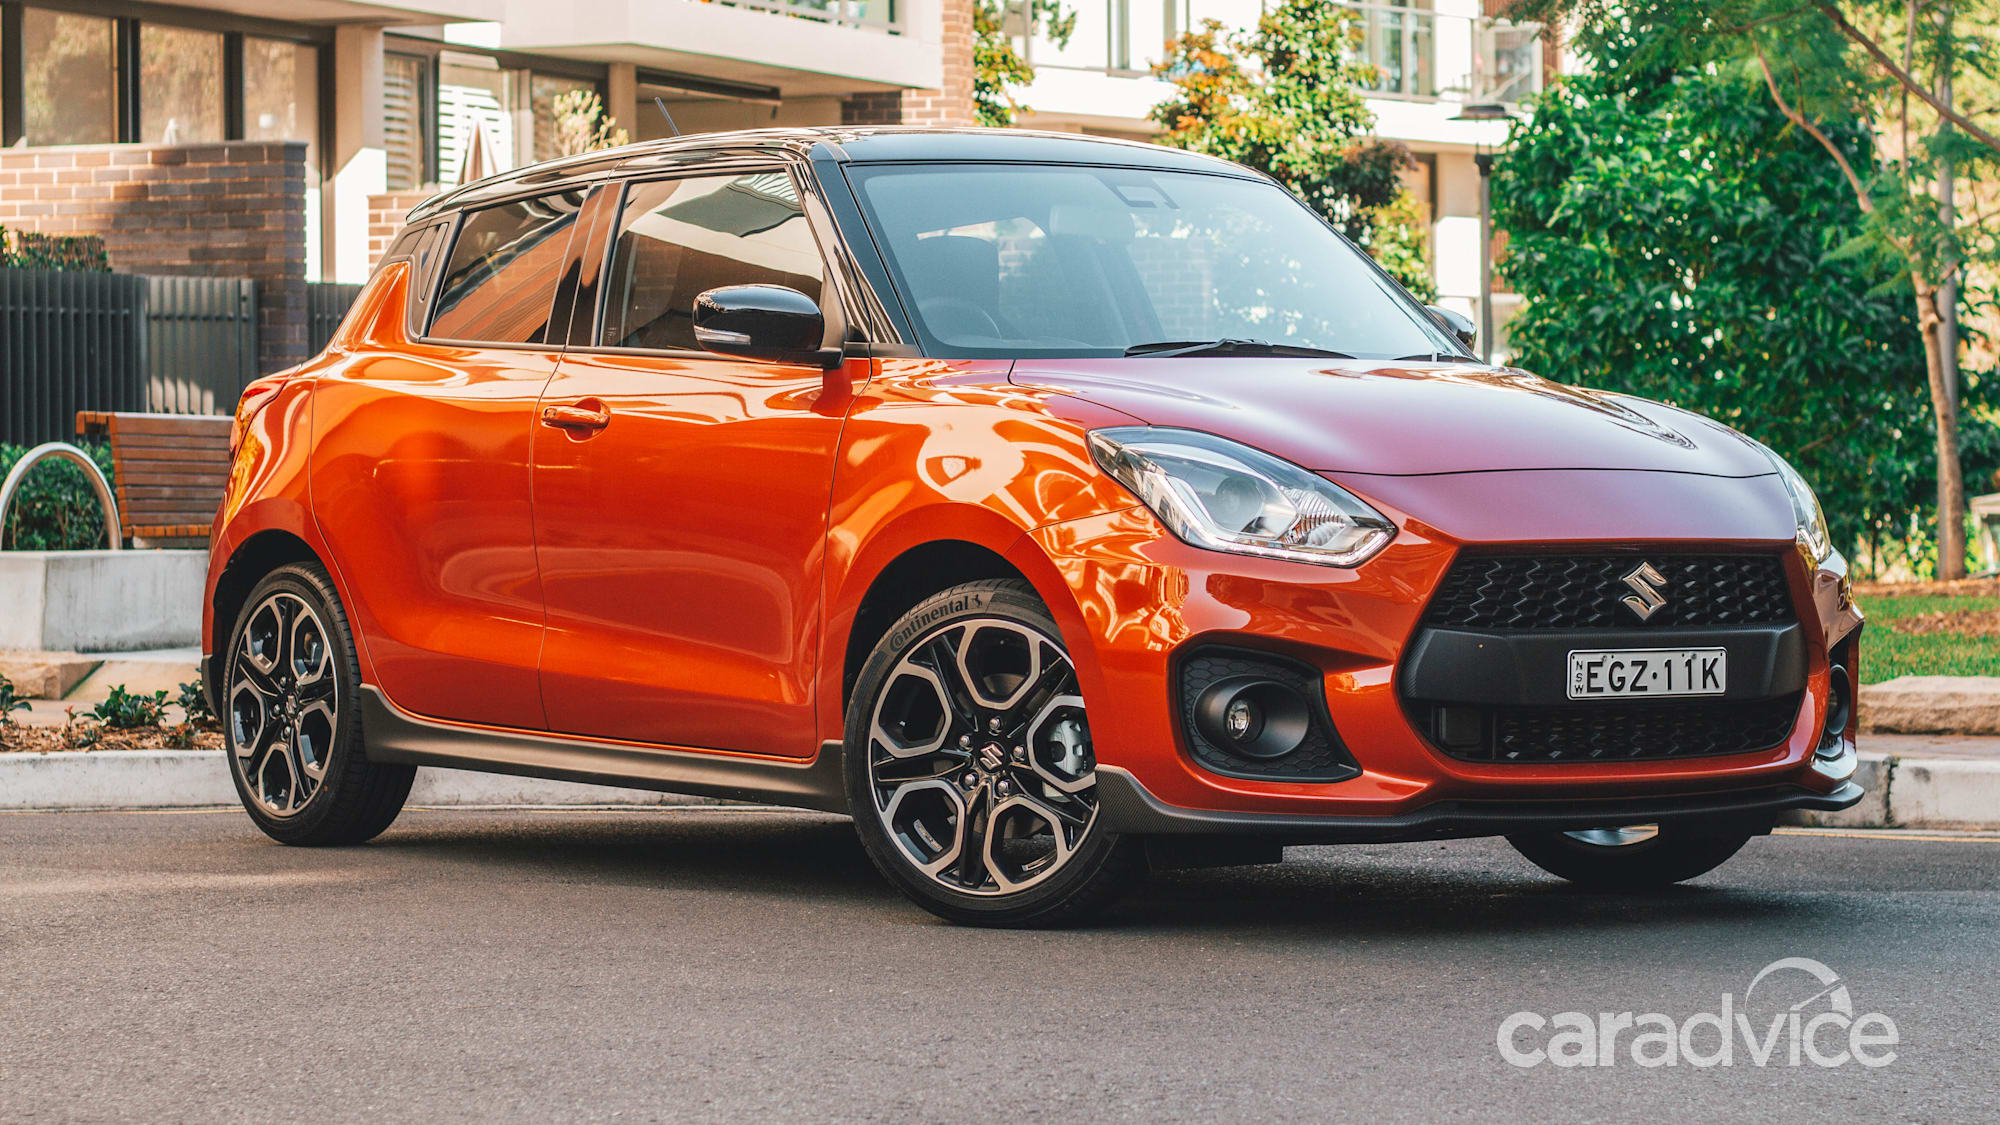 New Suzuki Swift to be unveiled mid2022, Swift Sport in 2023 – report